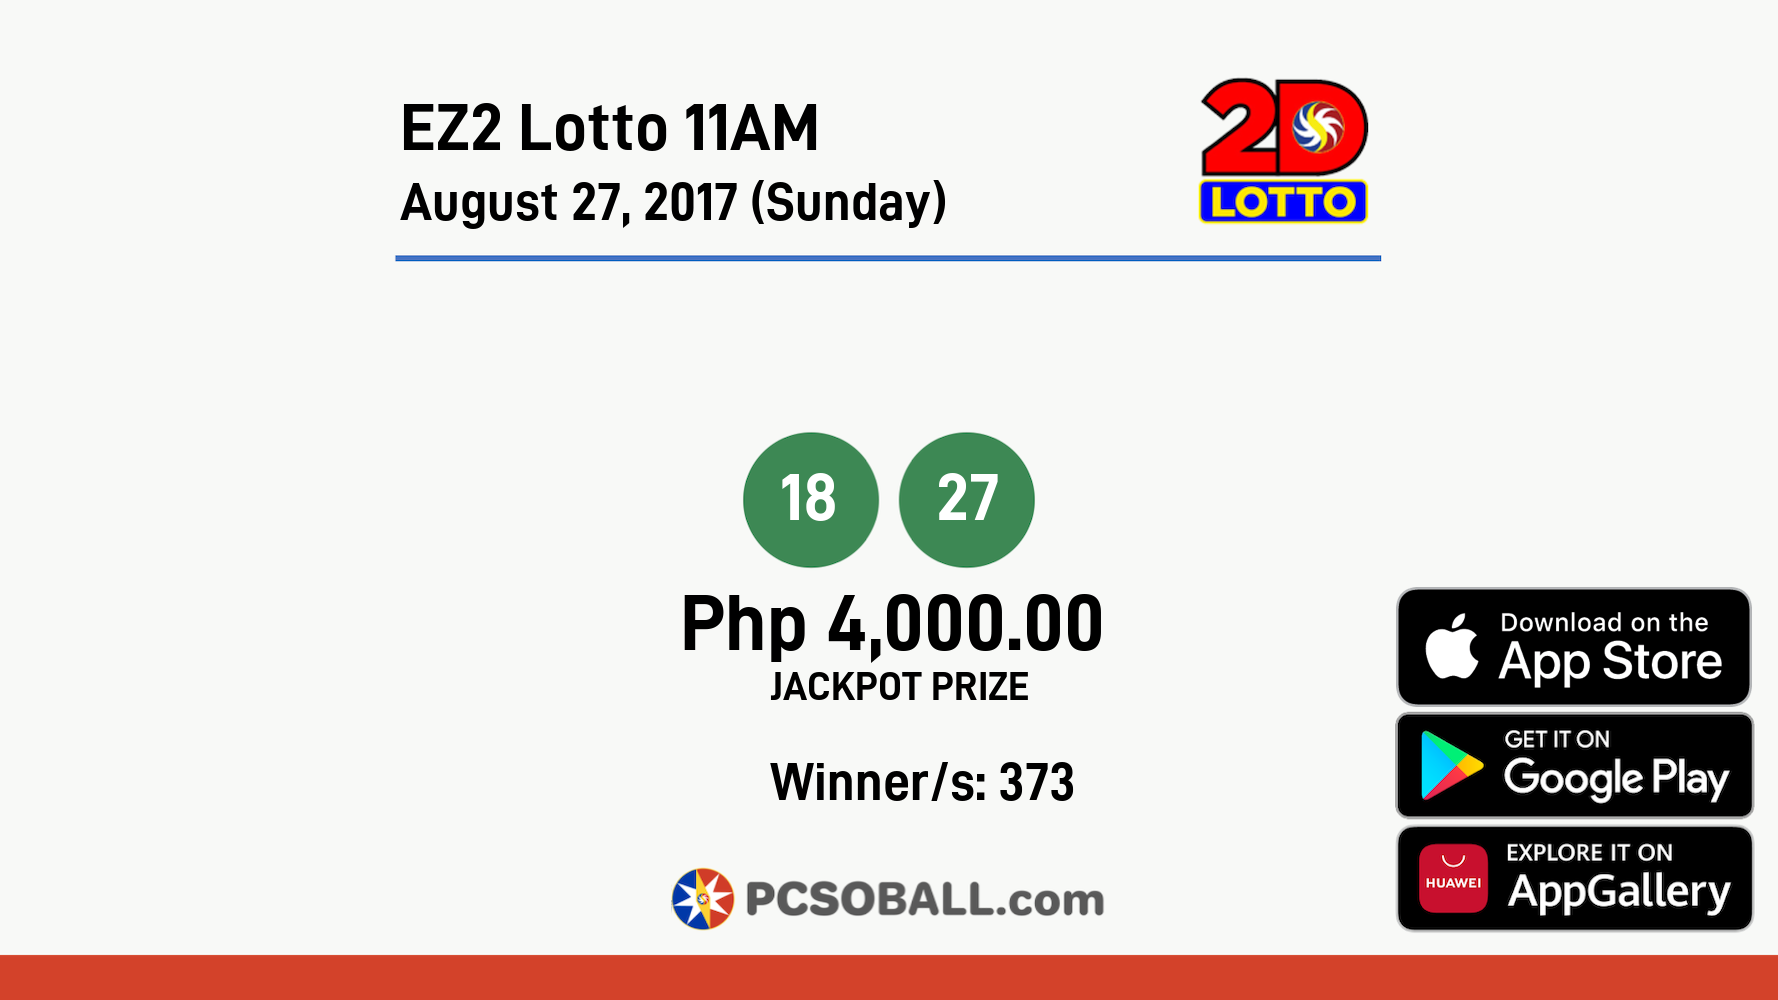 EZ2 Lotto 11AM August 27, 2017 (Sunday) Result